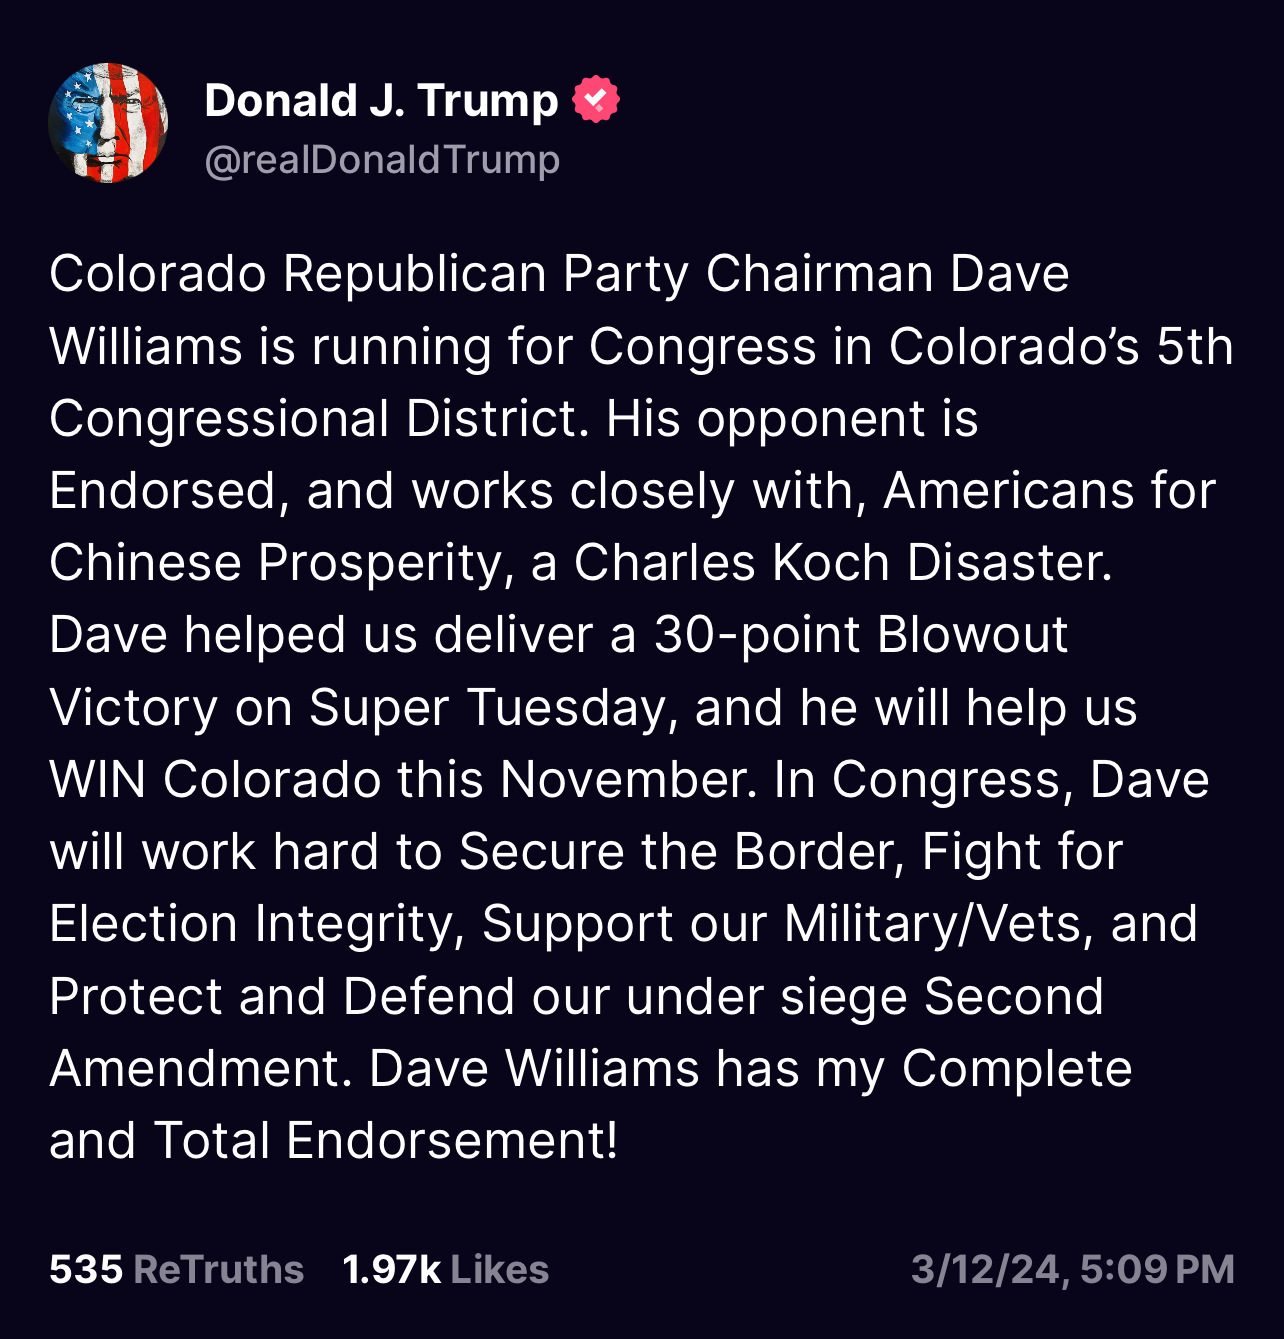 Donald J. Trump Endorses Colorado GOP Chairman Dave Williams In The Race For Colorado's 5th Congressional District